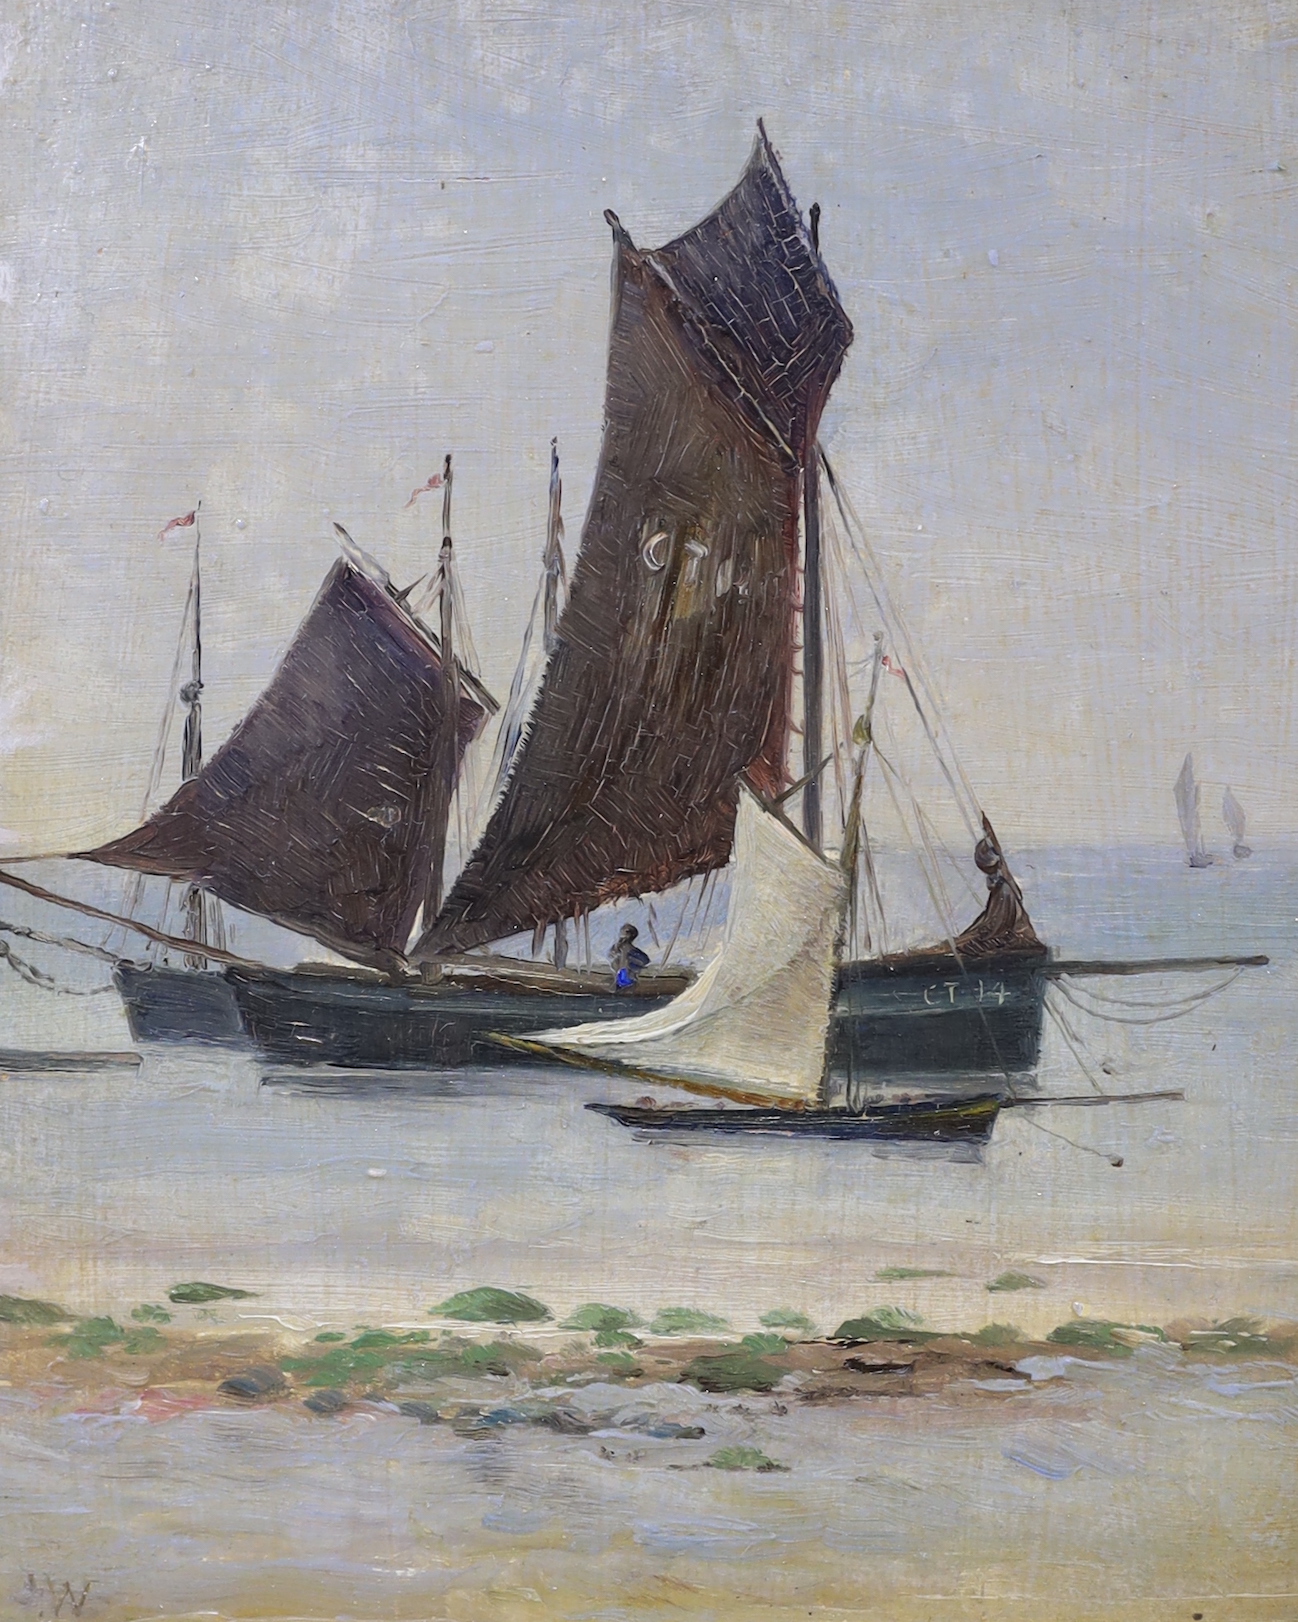 John White RI (1851-1933) oil on board, boats by the shore, initials of JW, 19 x 16 cm                                                                                                                                      